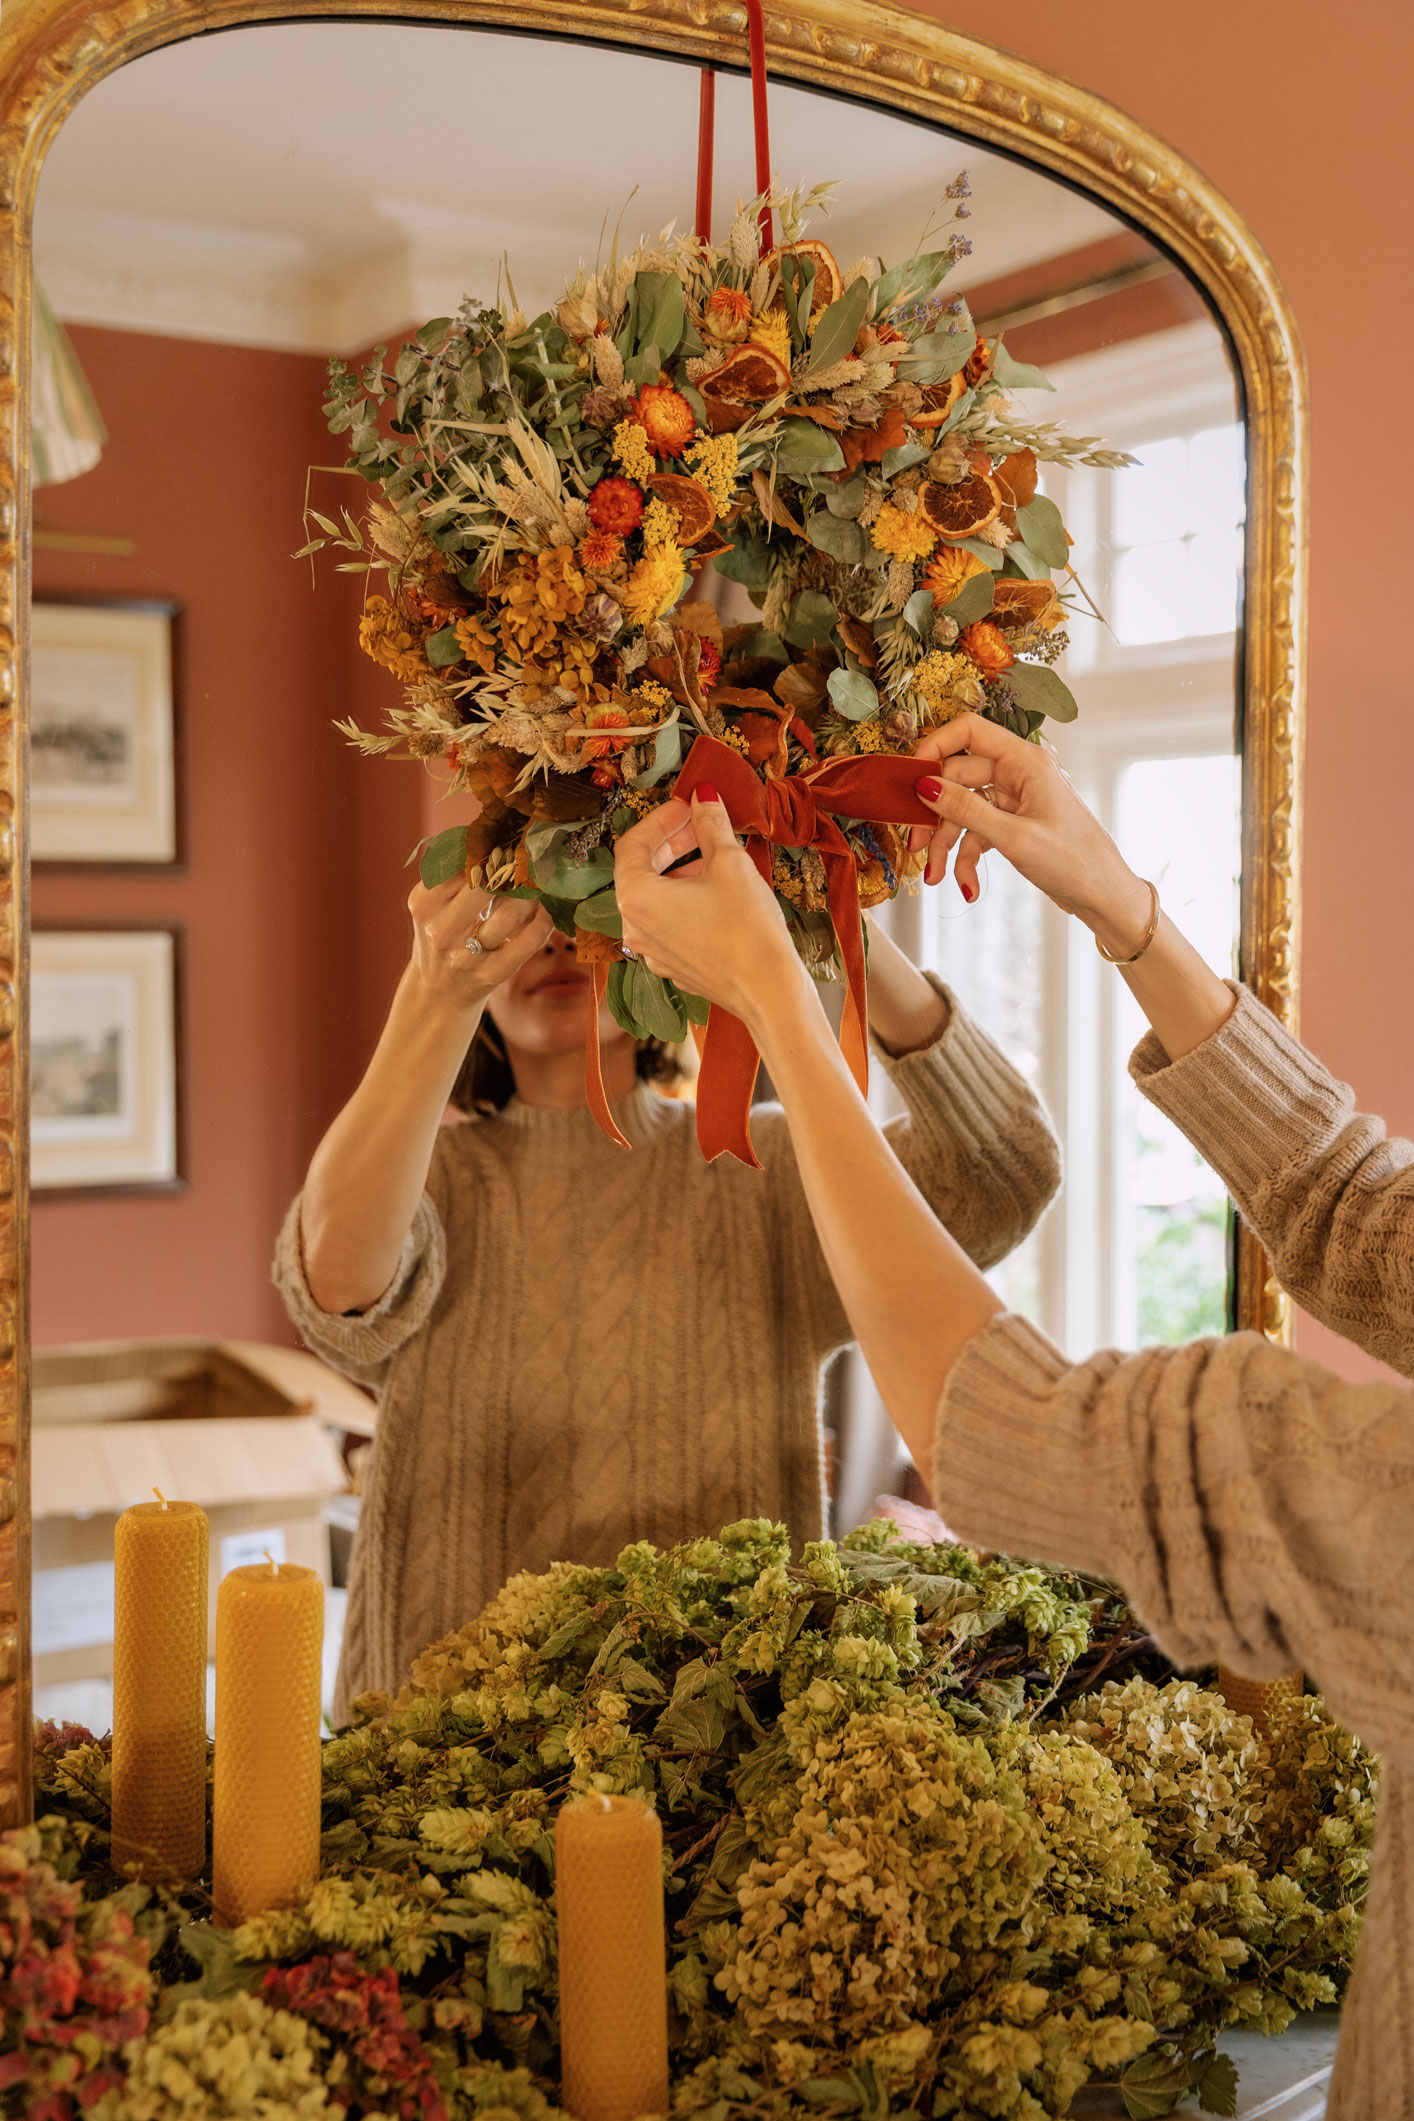 Louise & her Fall DIY wreath and mantle decor